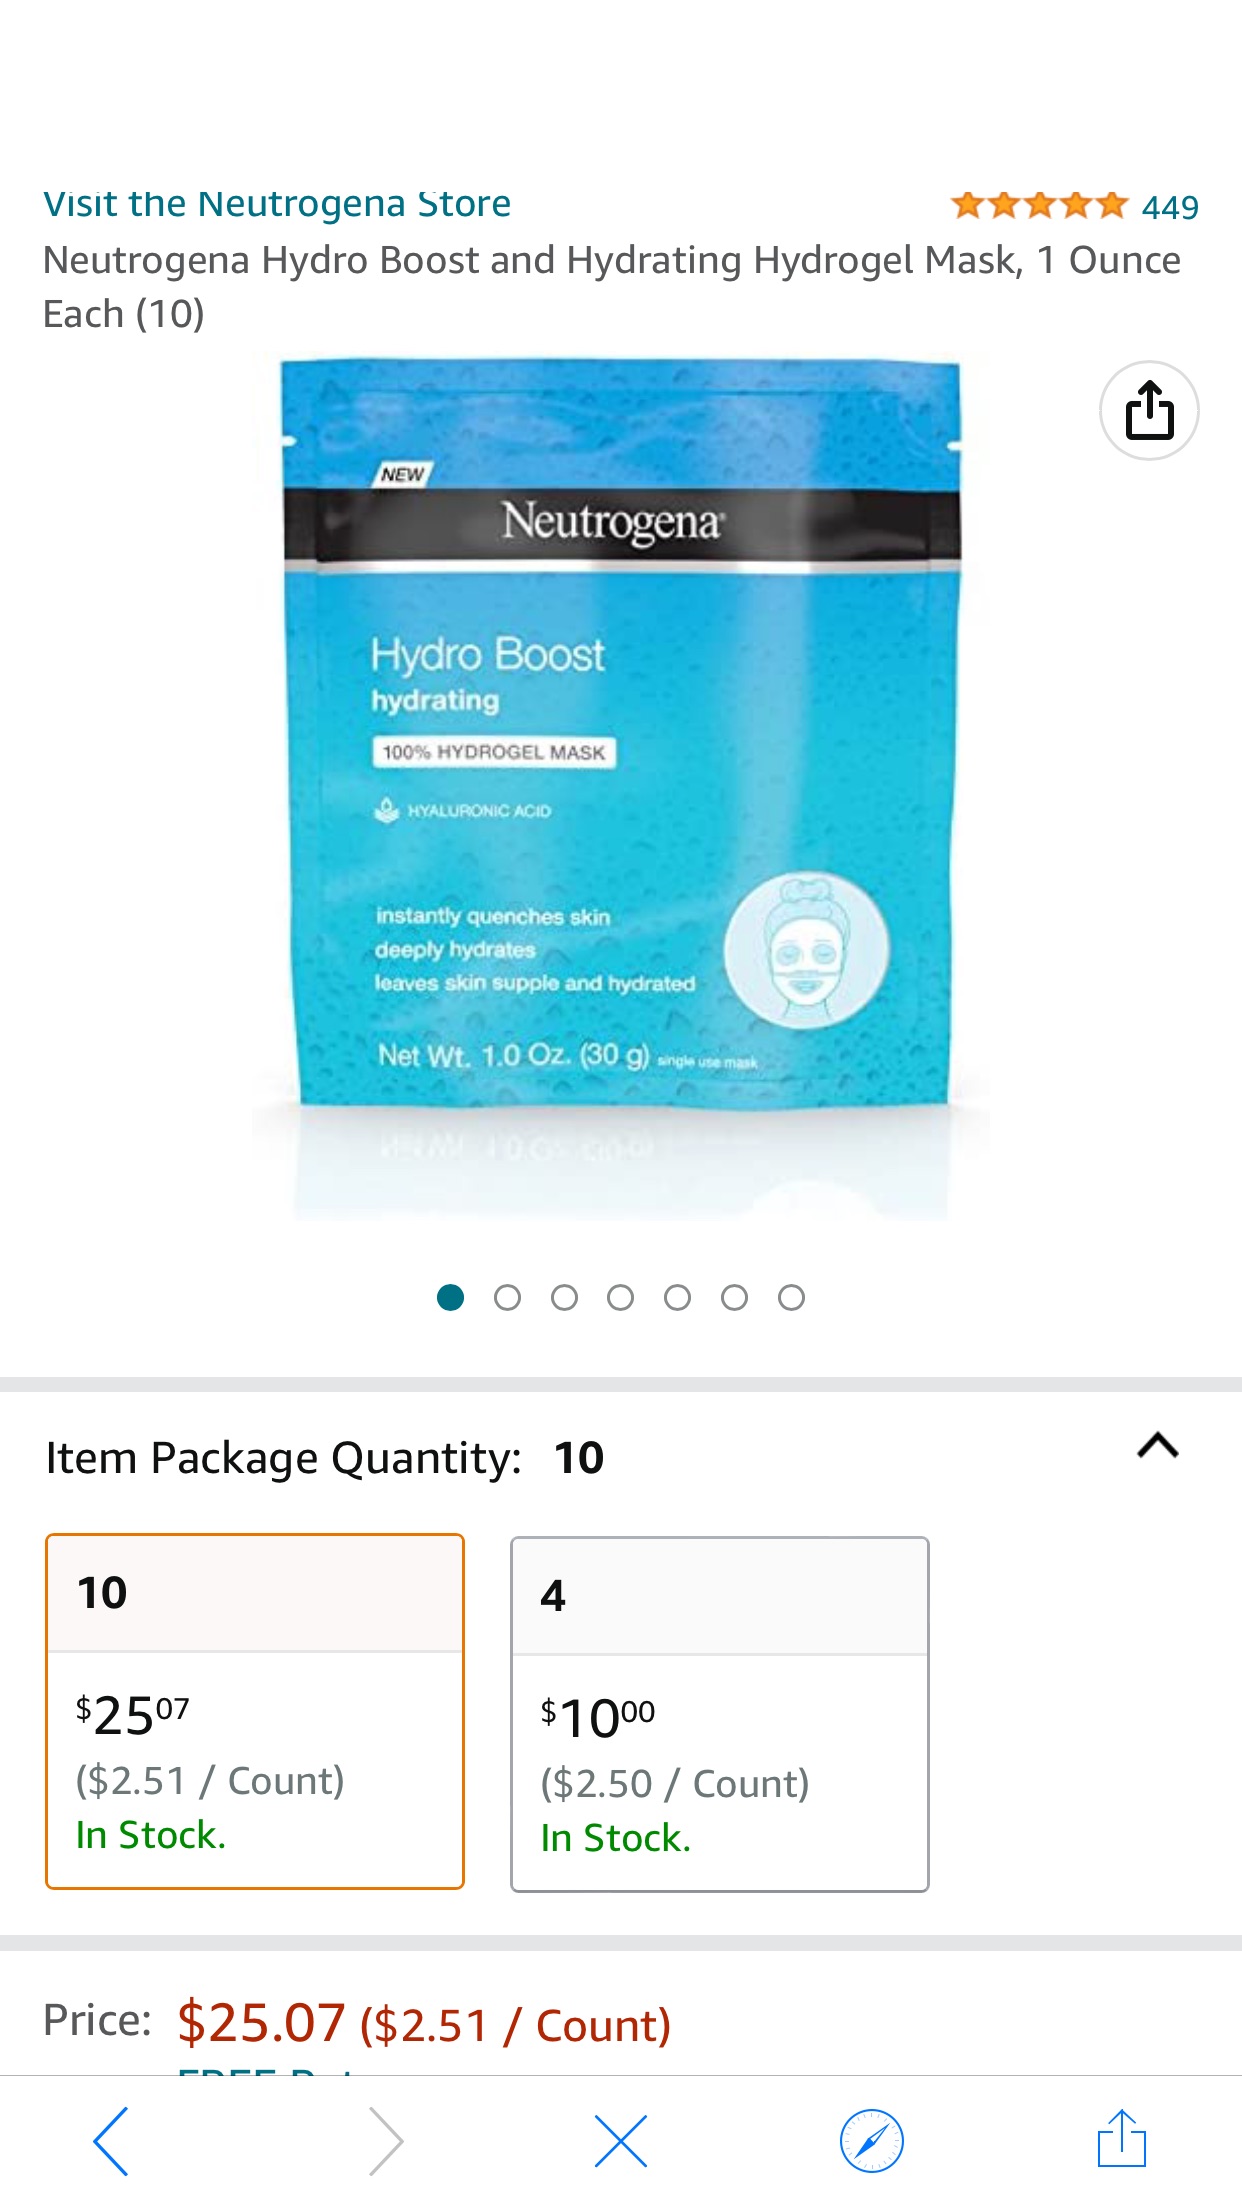 Amazon.com: Neutrogena Hydro Boost and Hydrating Hydrogel Mask, 1 Ounce Each (10) : Beauty & Personal Care